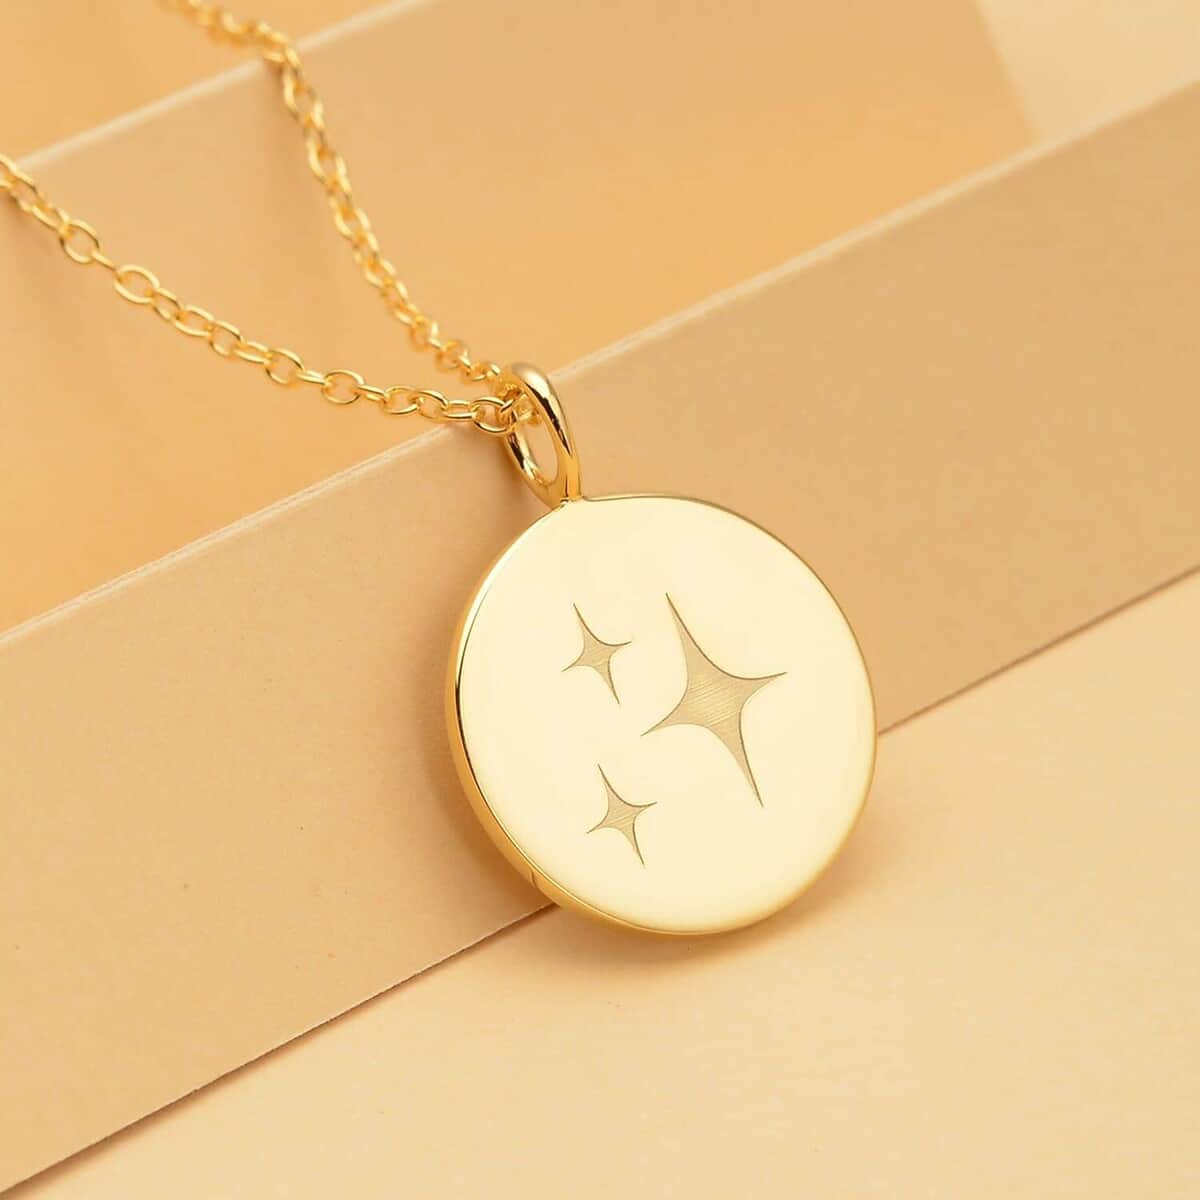 Star Sign Pendant Necklace, 16-18 Inch Adjustable Necklace, 14K Yellow Gold Over Sterling Silver Pendant Necklace 4.10 Grams image number 1